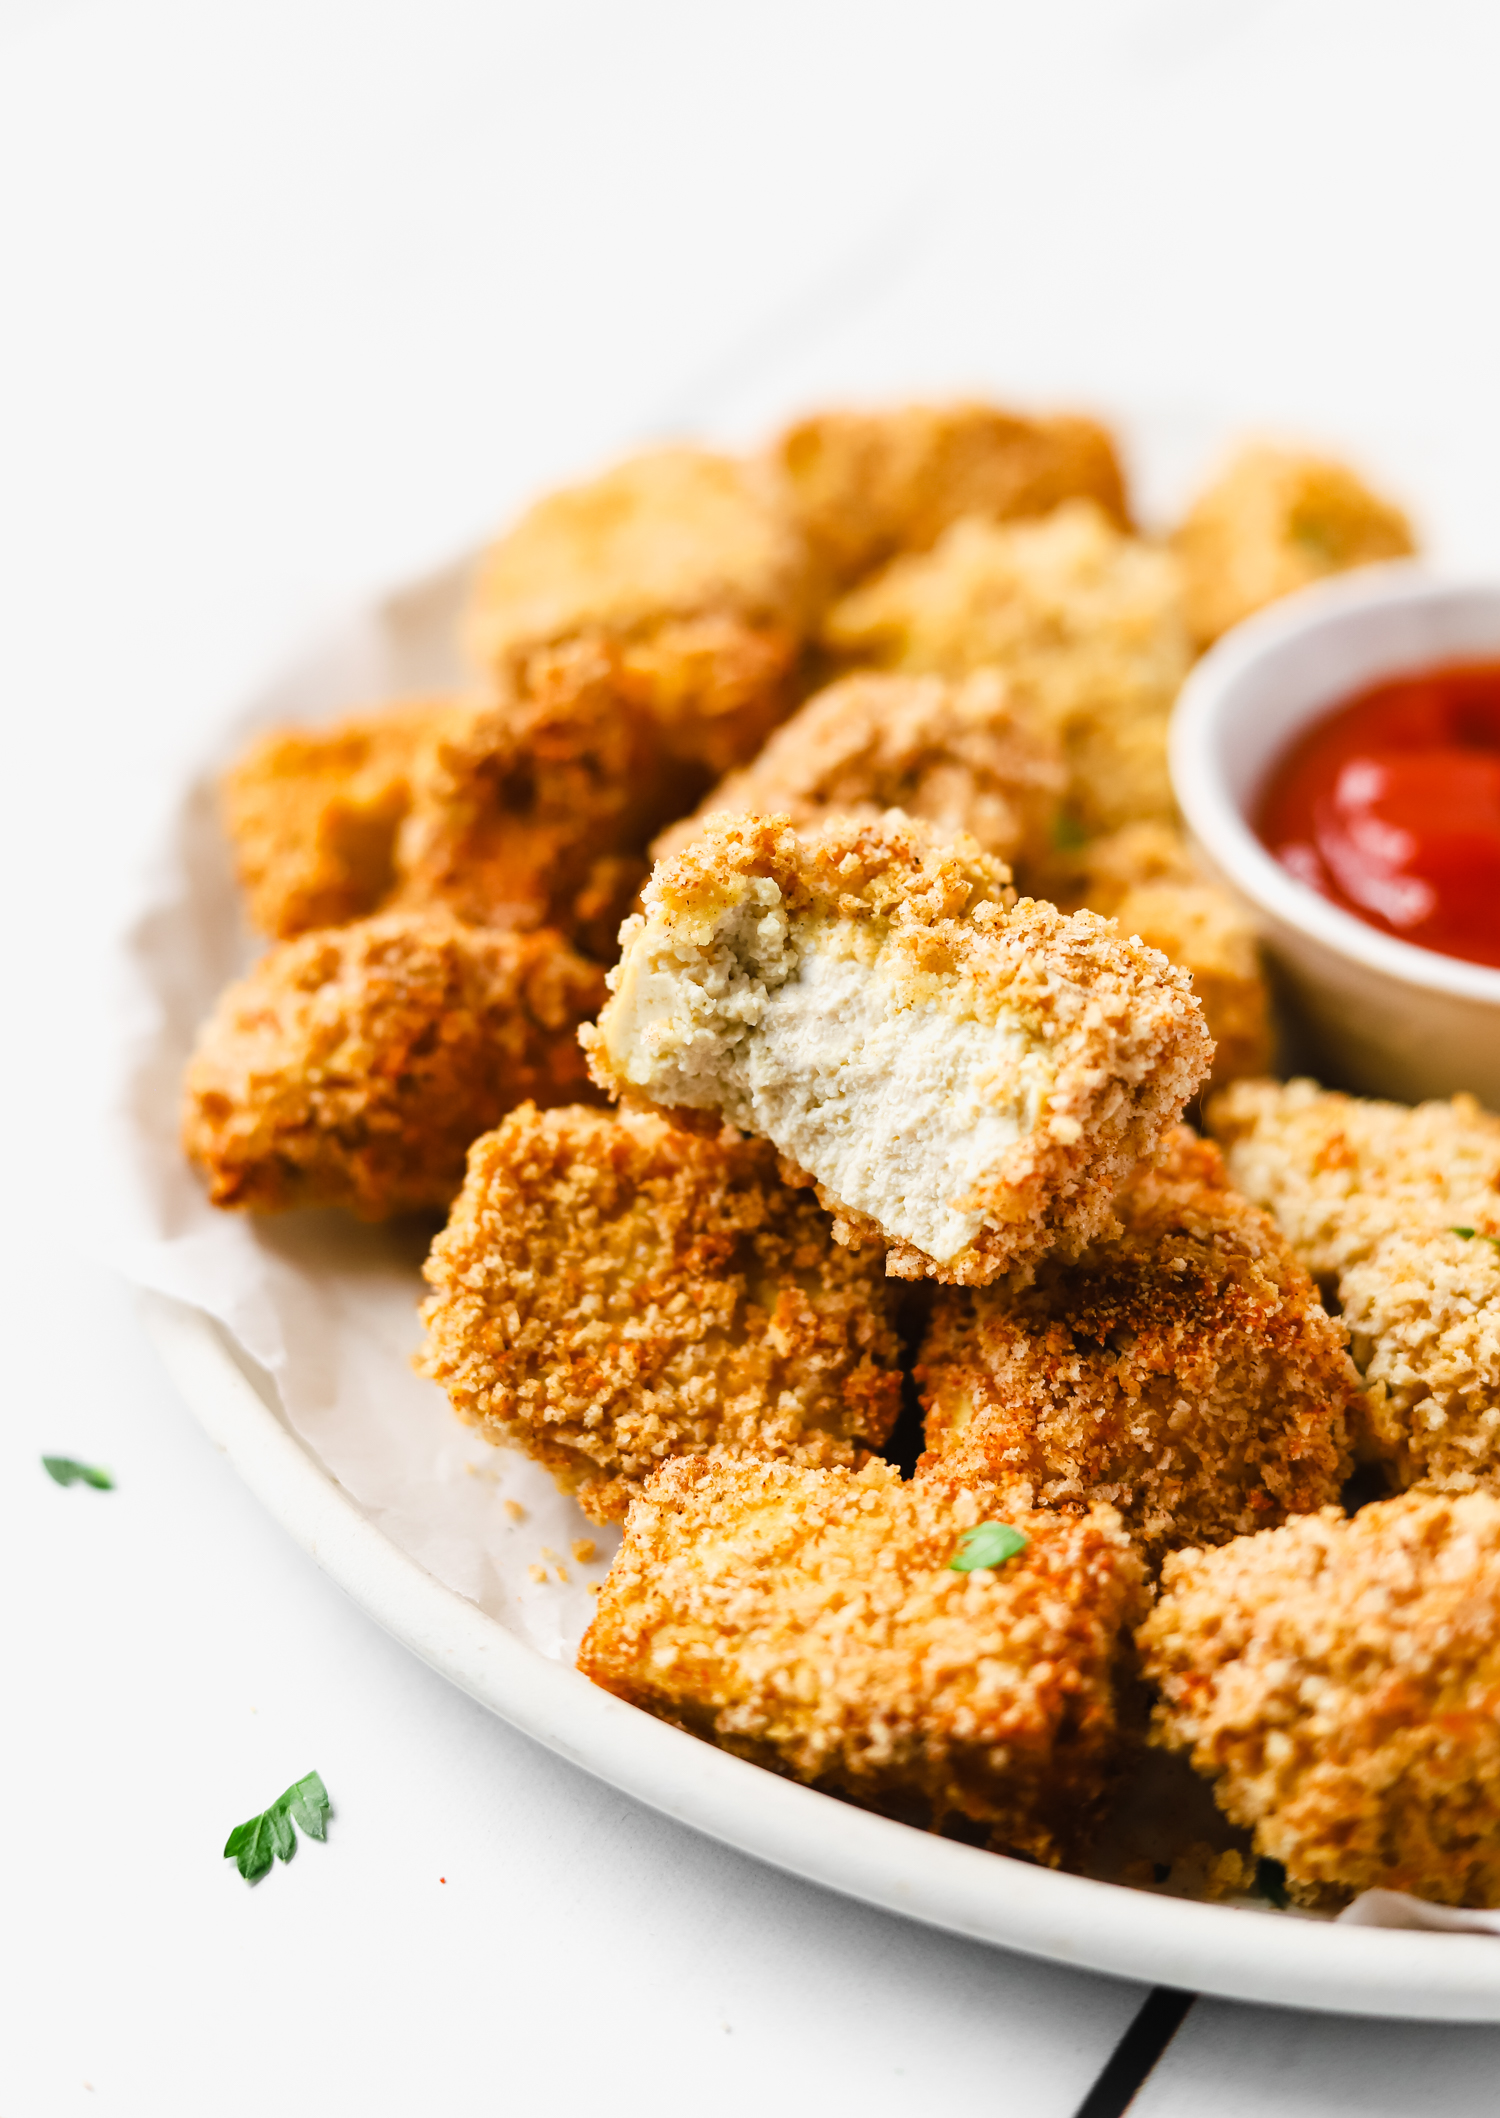 Baked vegan tofu chicken nuggets on a plate.